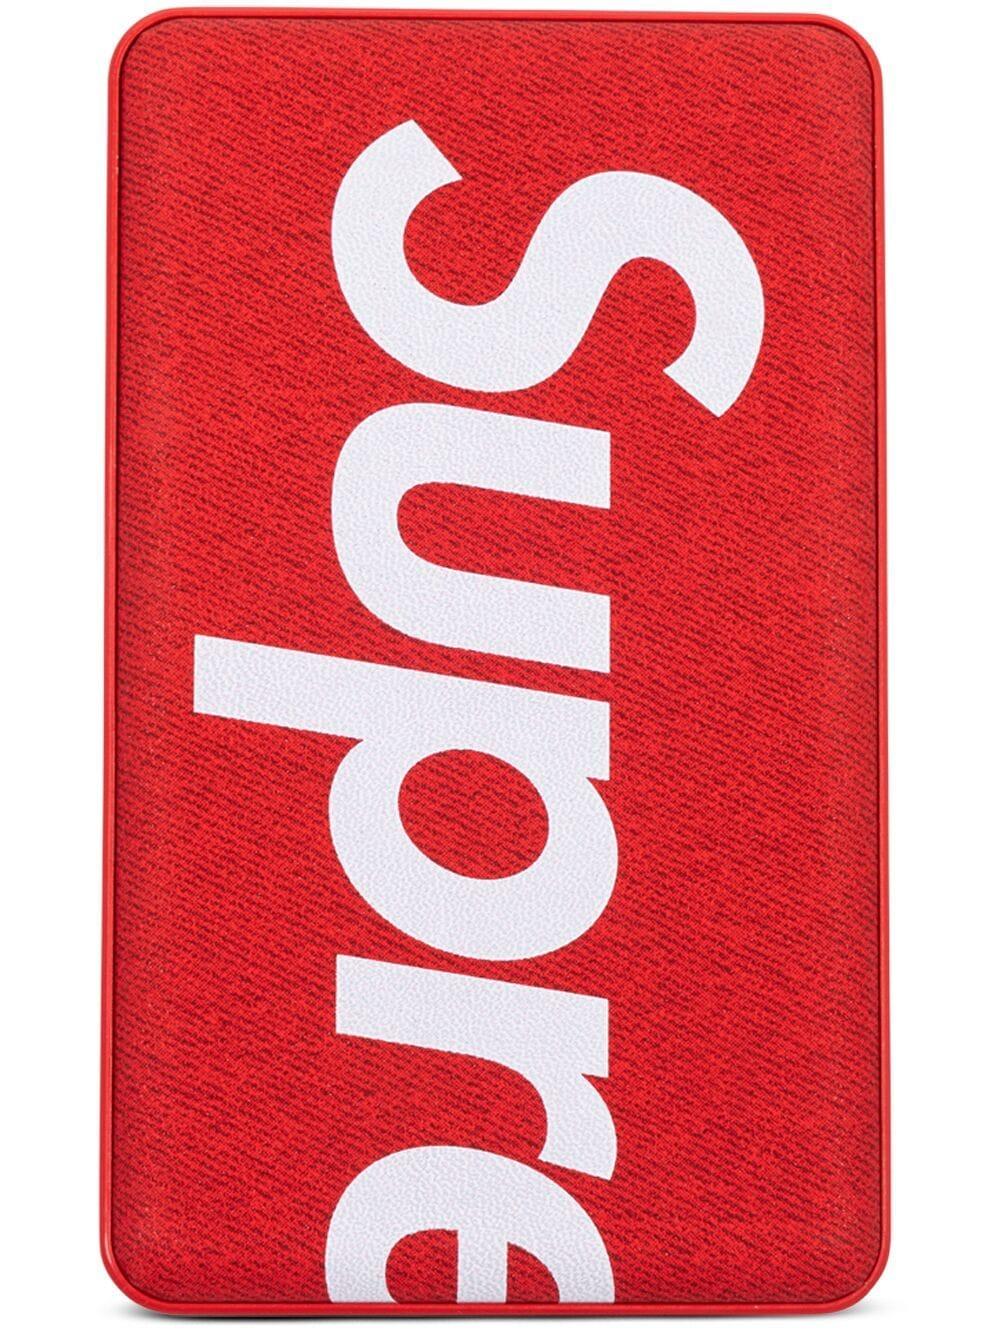 Supreme X Mophie Snap Portable Charger in Red